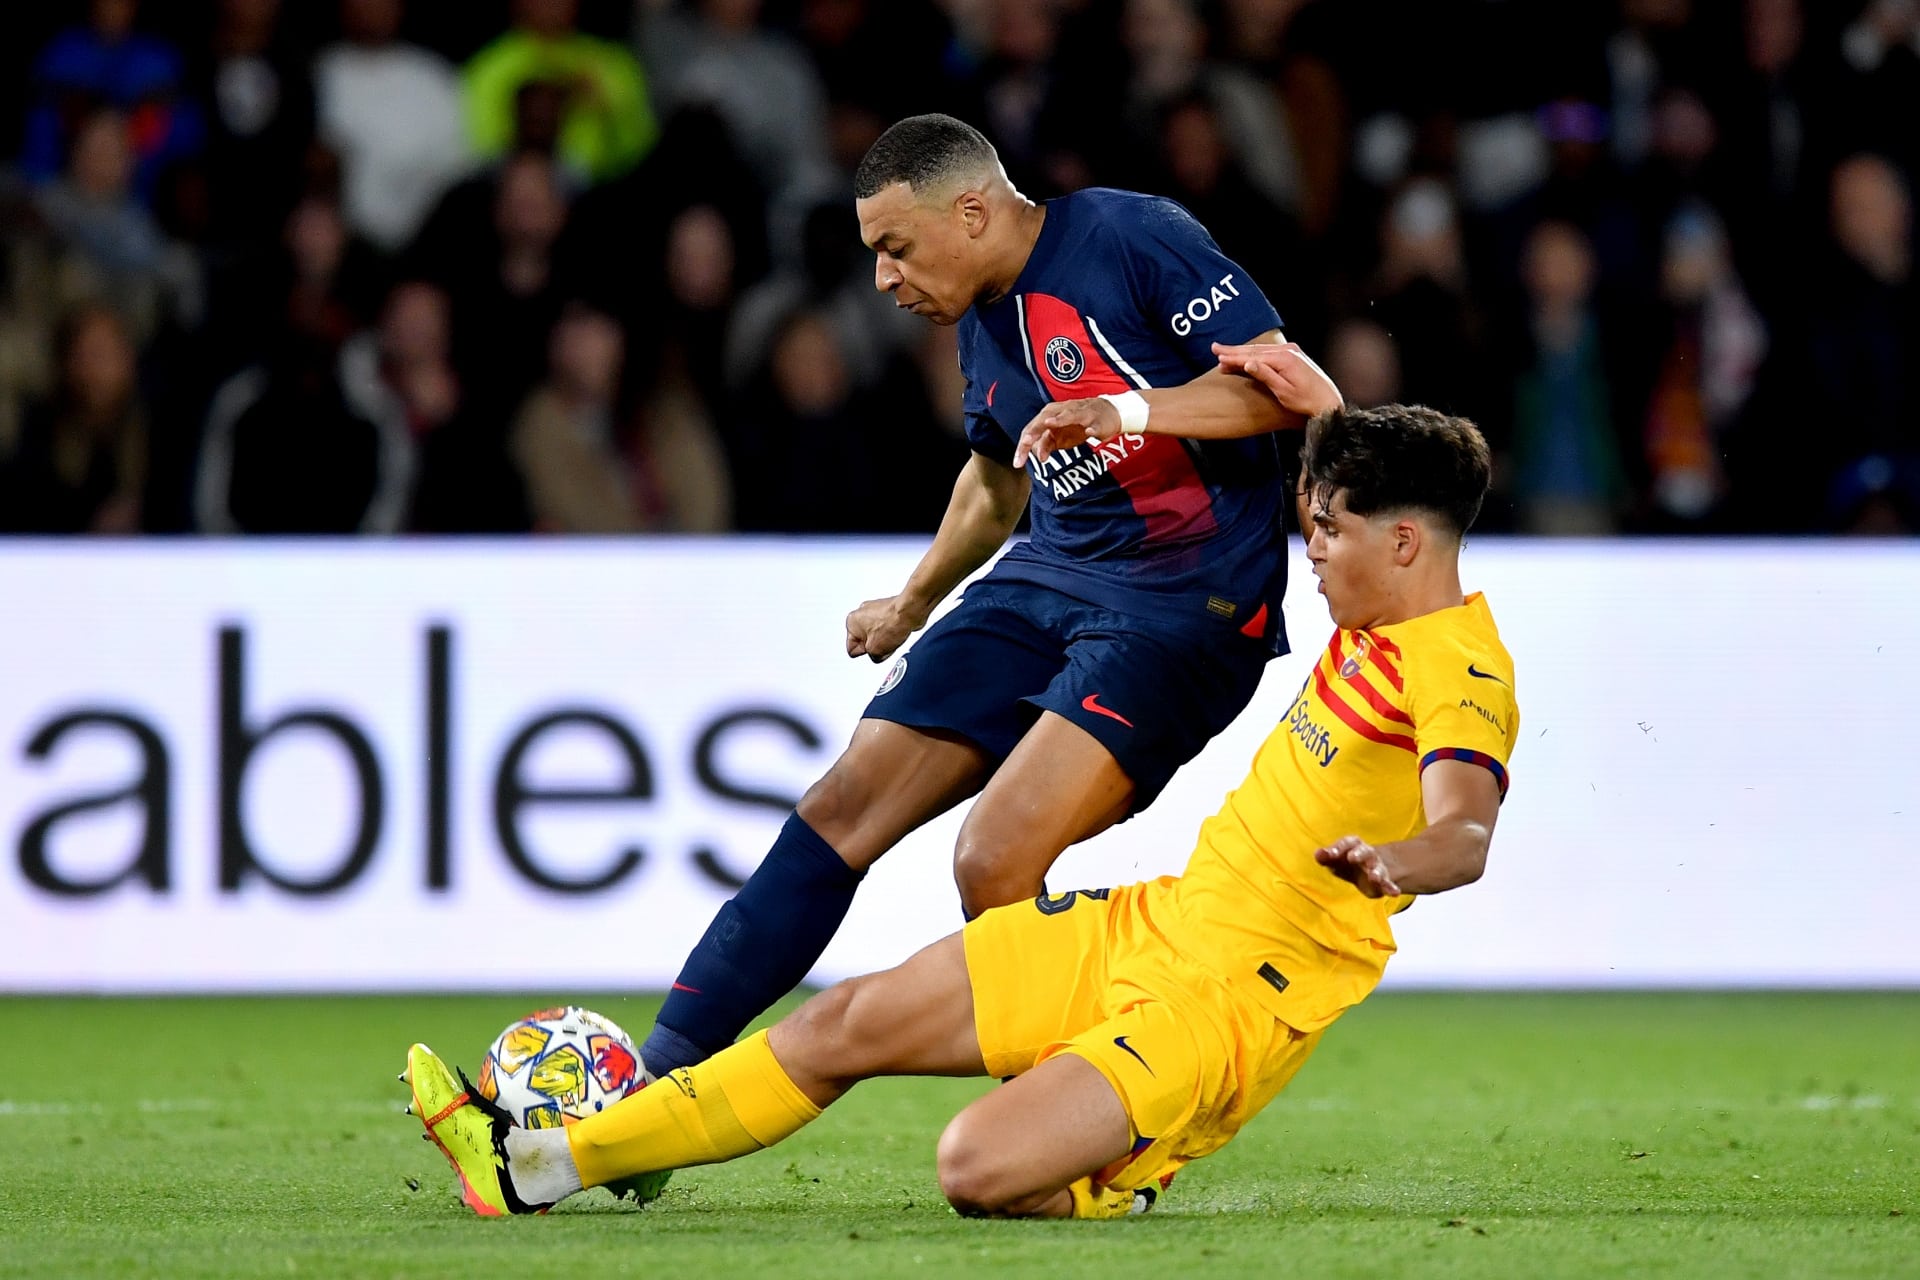 Barcelona’s Champions League dream ends with 10-man collapse against PSG